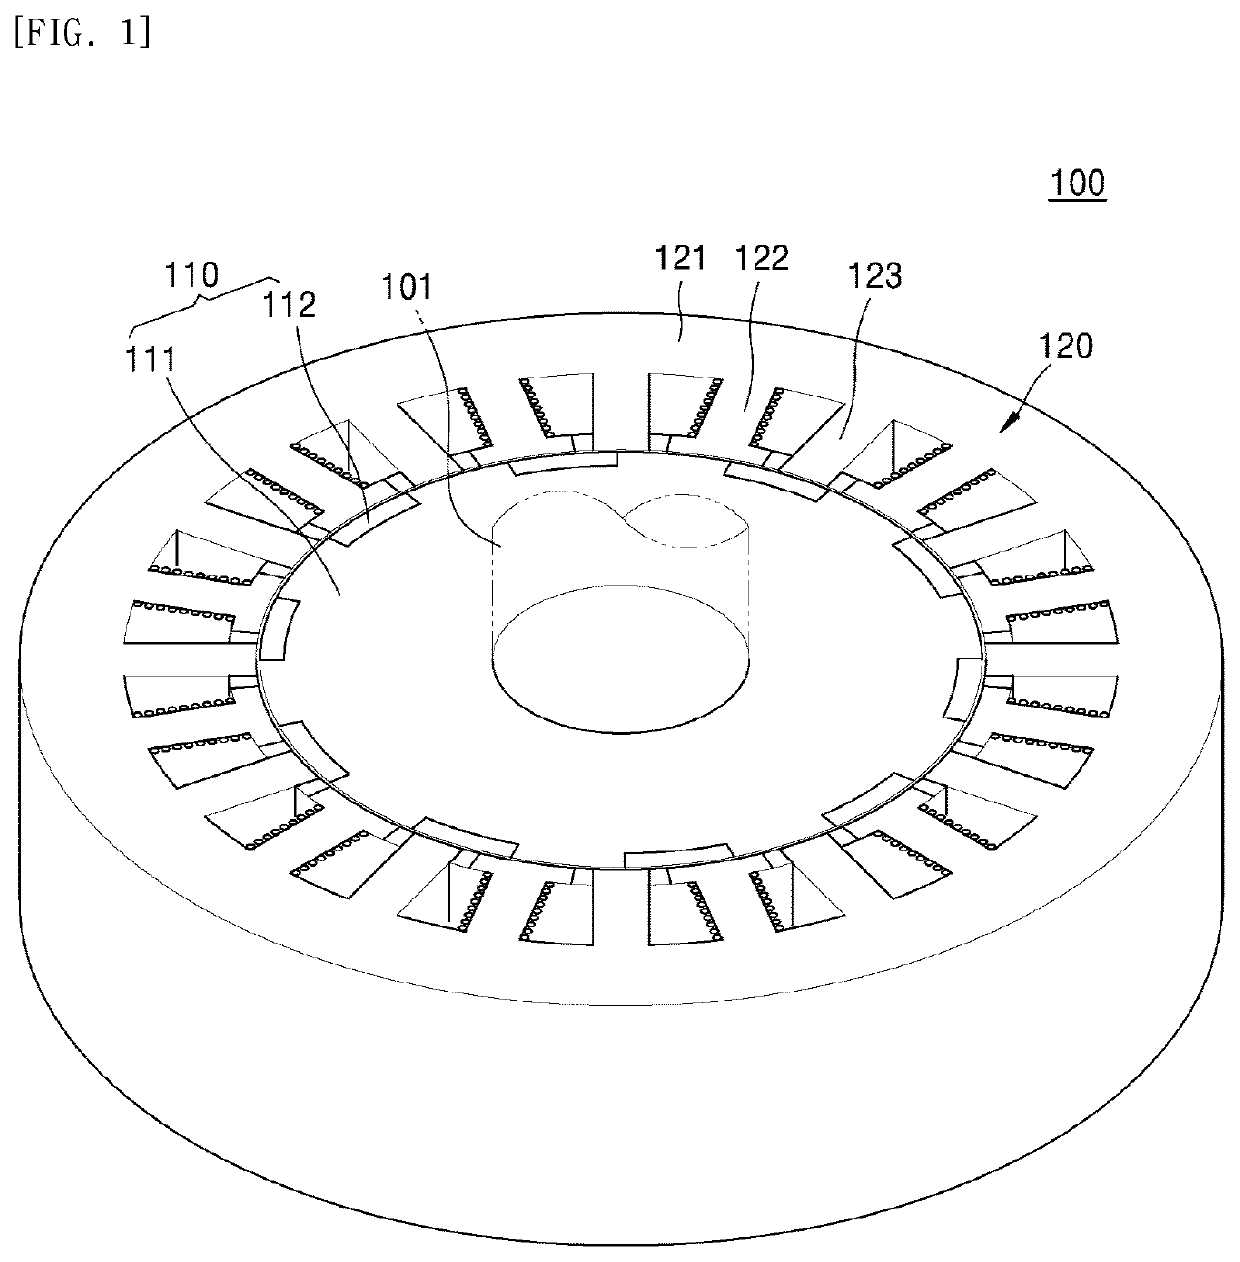 Stator and motor assembly including same